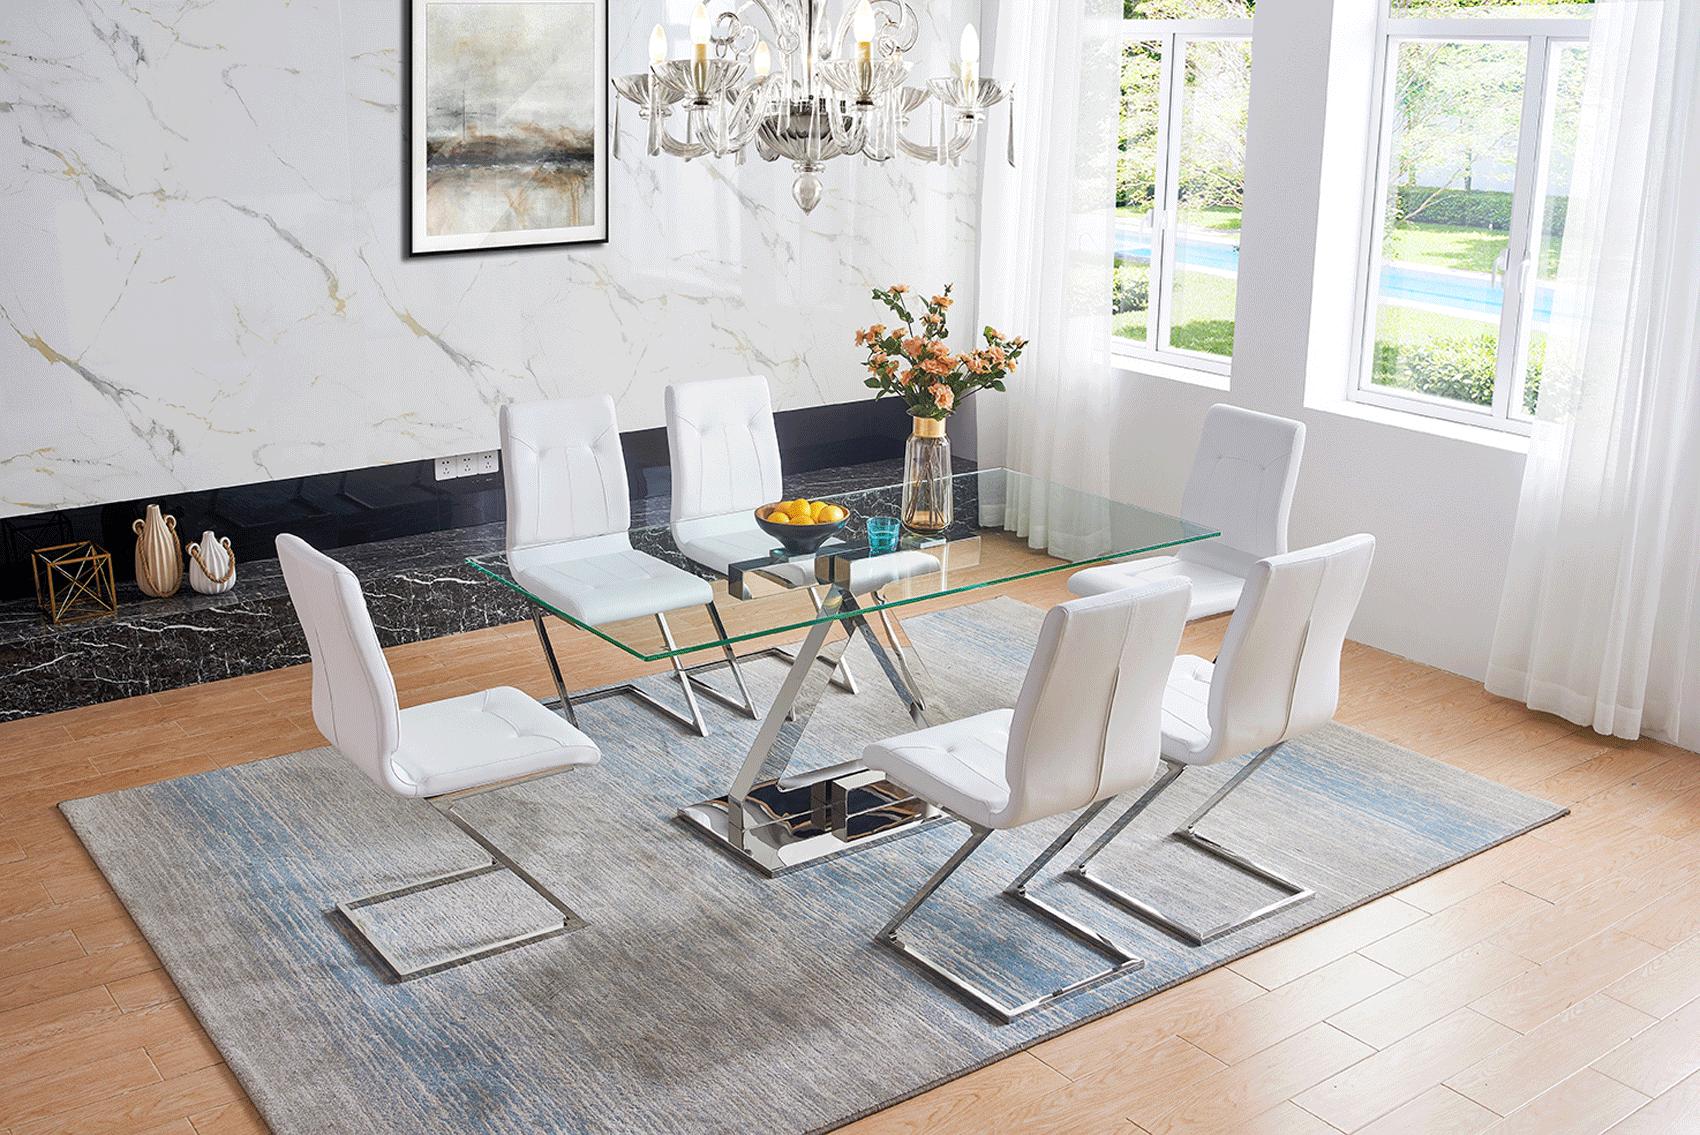 Contemporary, Modern Dining Table Set Zig Zag Dining Table with Zig Zag Chairs ZZ180-5PC in White, Silver Eco Leather